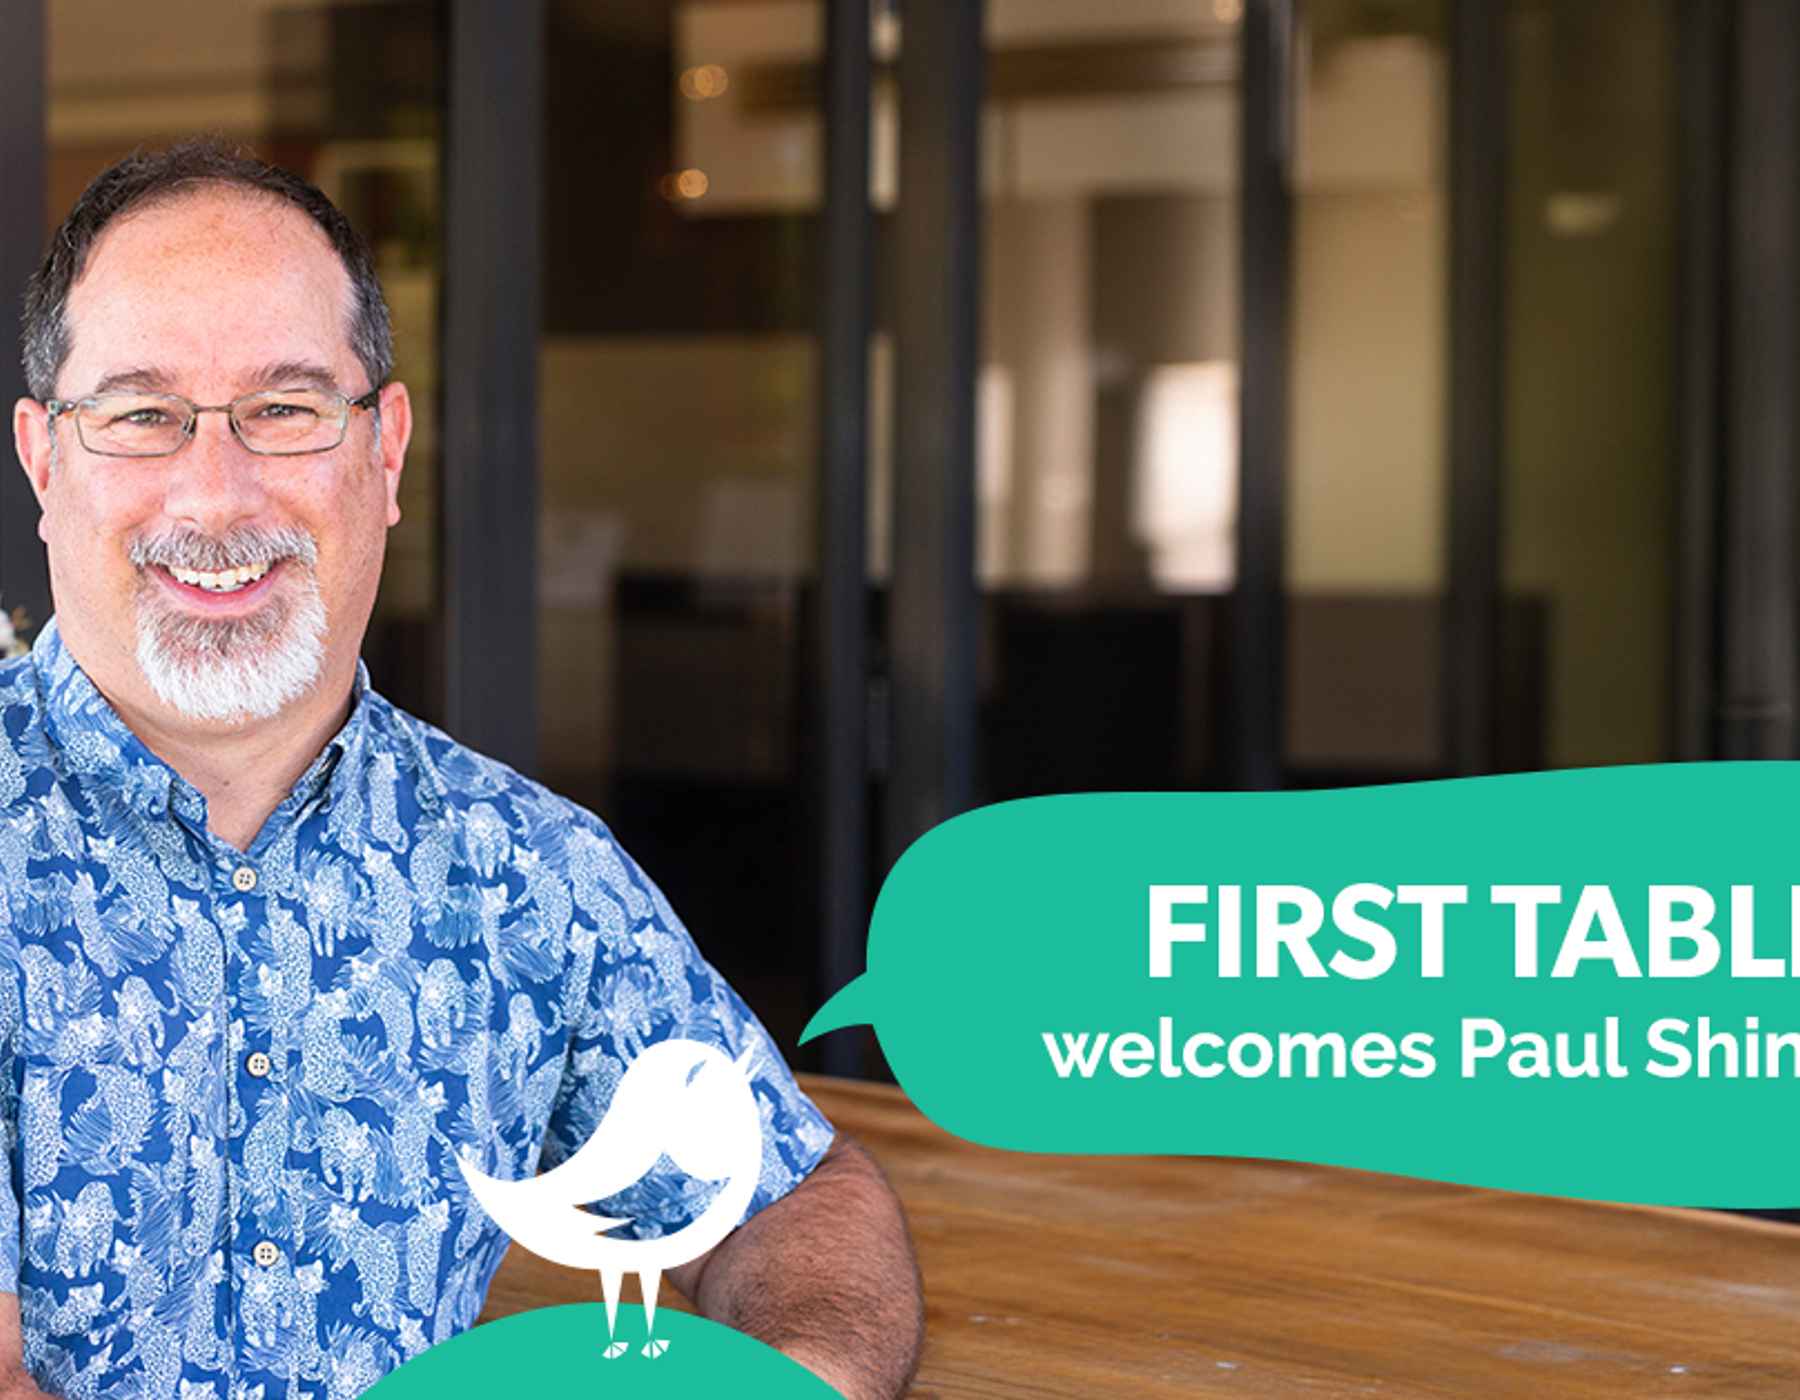 First Table welcomes Paul Shingles to its Board of Directors